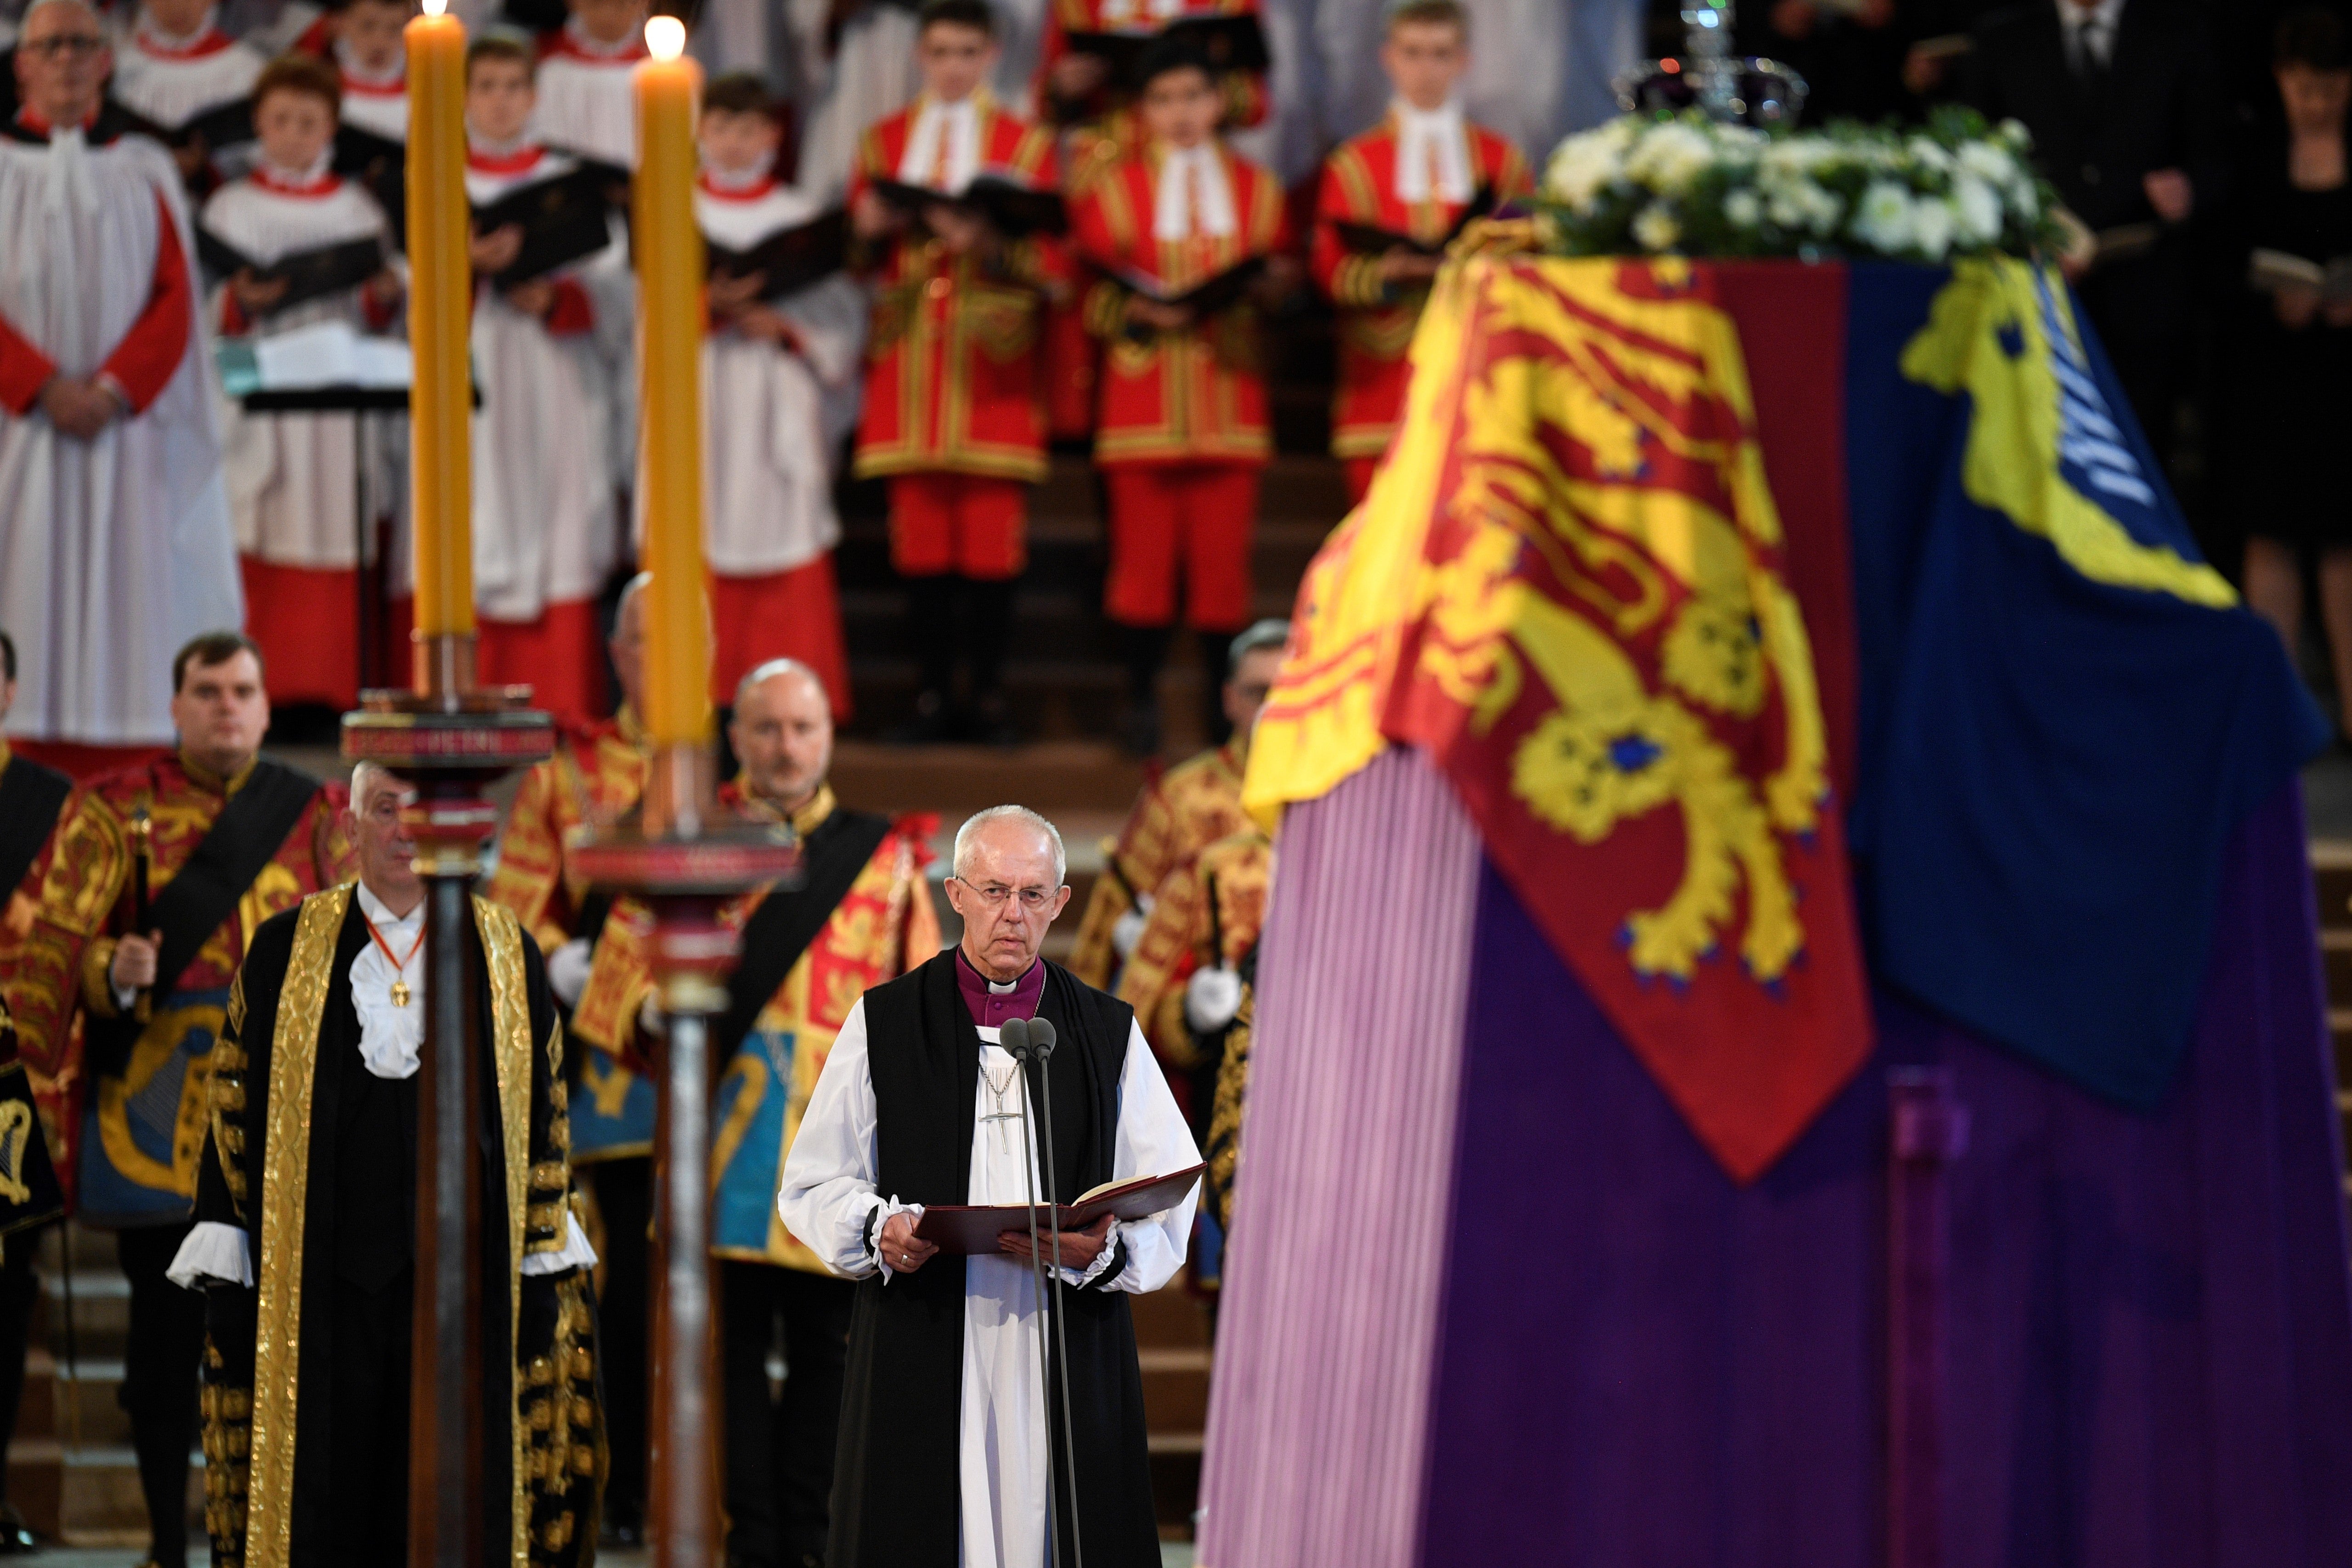 Archbishop of Canterbury Justin Welby leading a service in Westminster Hall